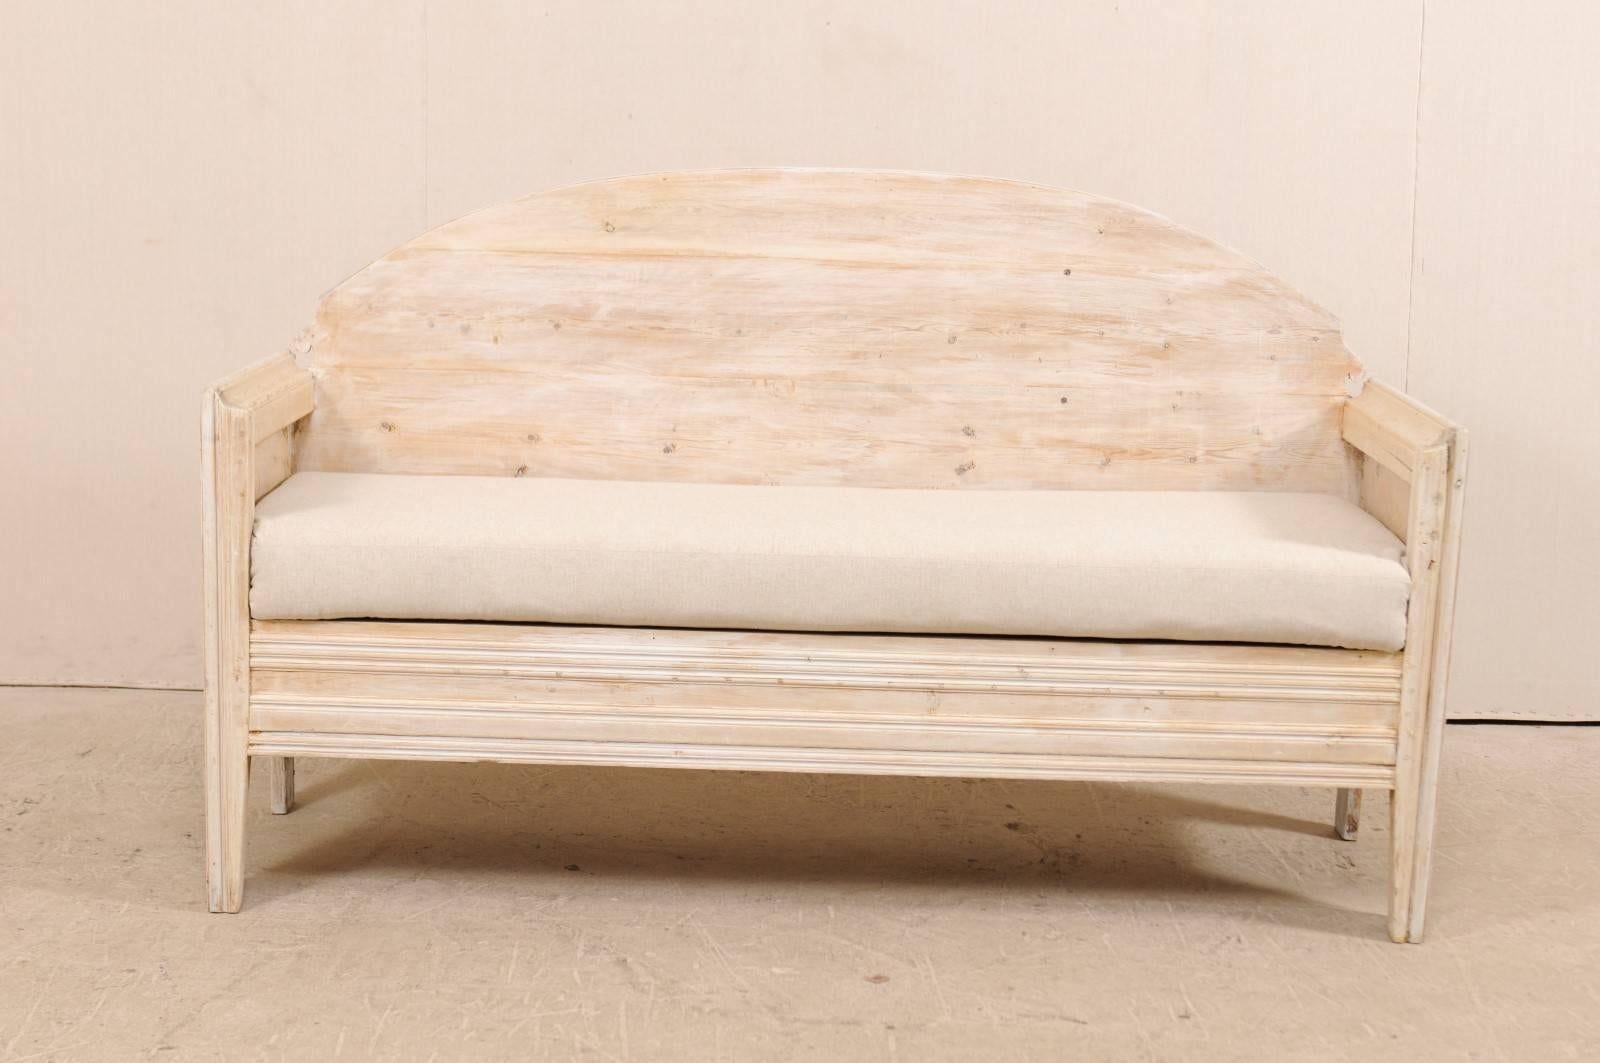 A Swedish sofa bench from the early 19th century. This antique Swedish wood sofa bench features a nicely arched back with decorative cut-out at each far corner, high arms, and clean linear lines across the front skirt . This bench is raised on